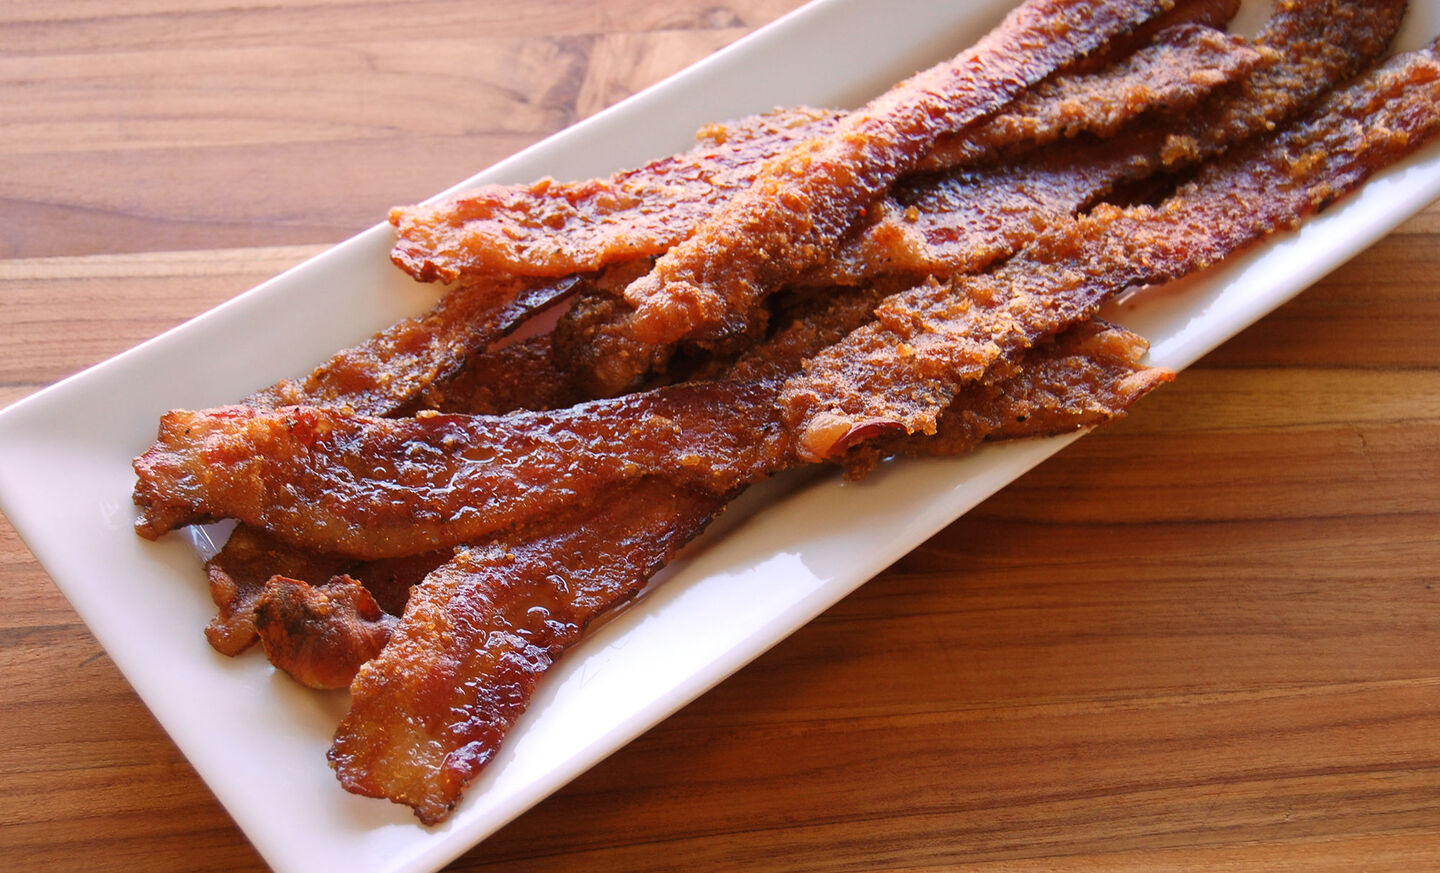 Candied bacon made with brown sugar